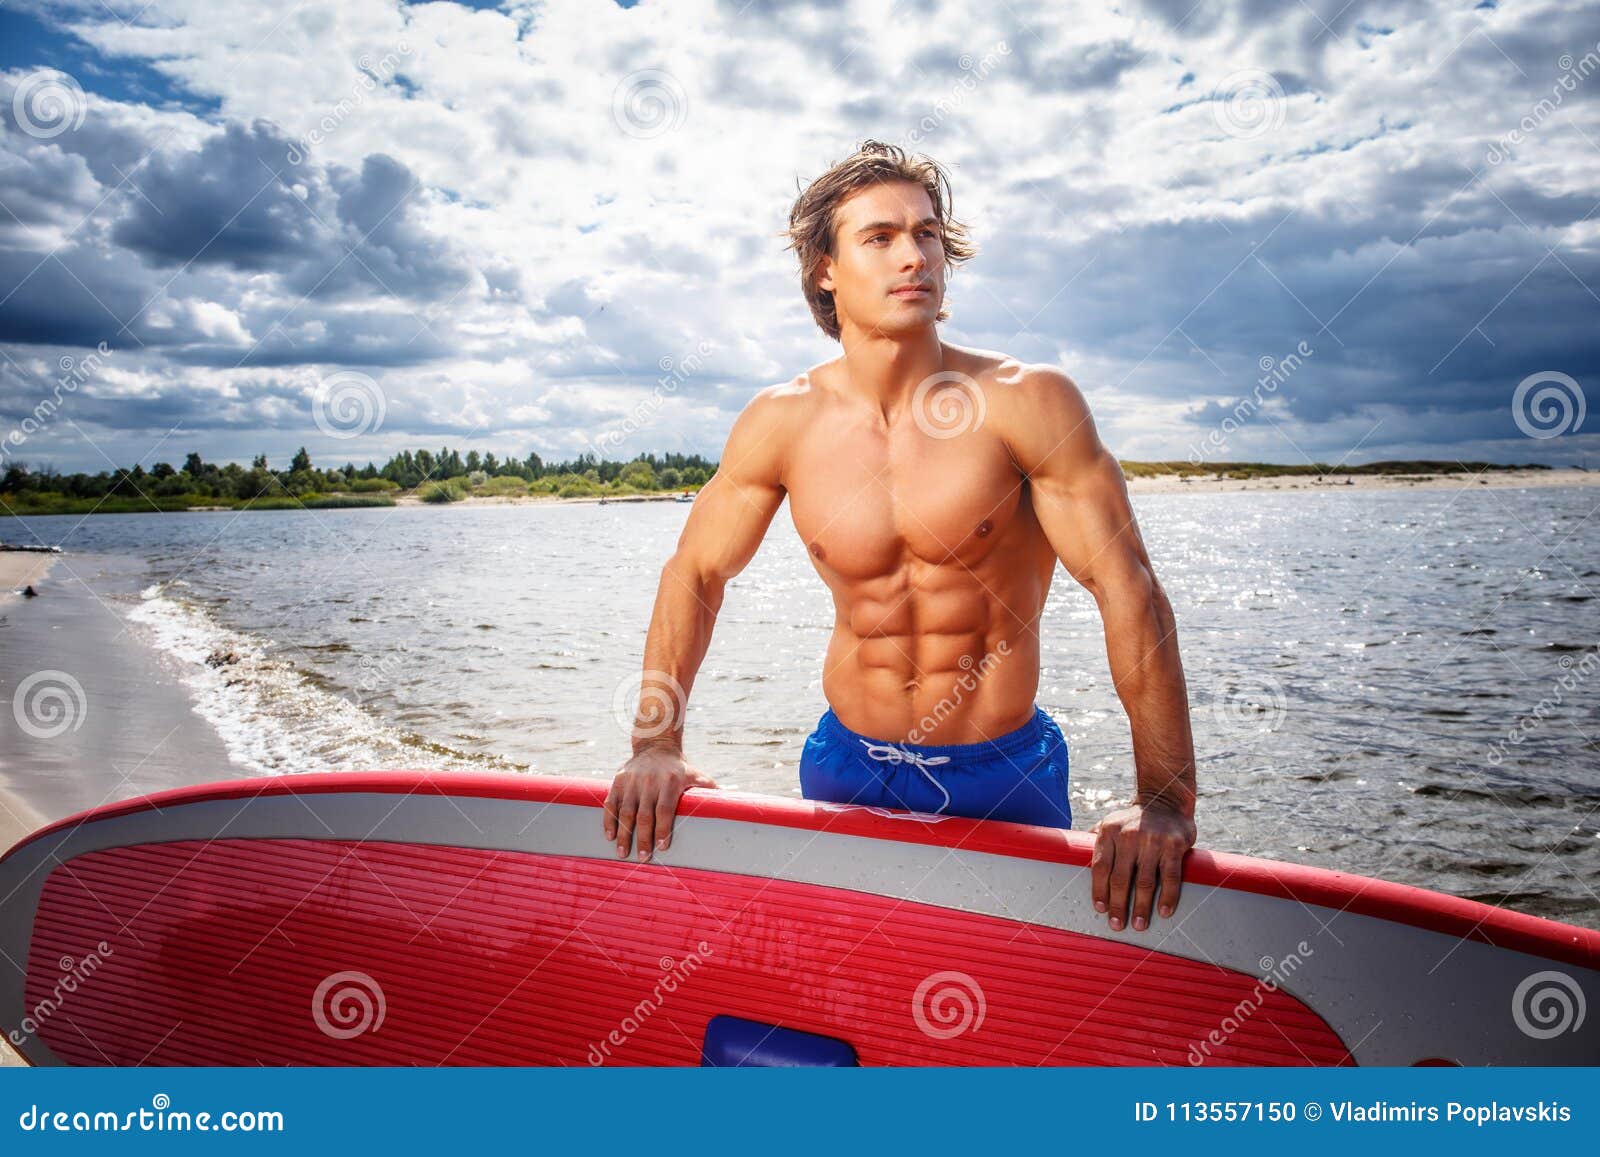 Fitness Male Model In White Pants And Shirtless Posing On 